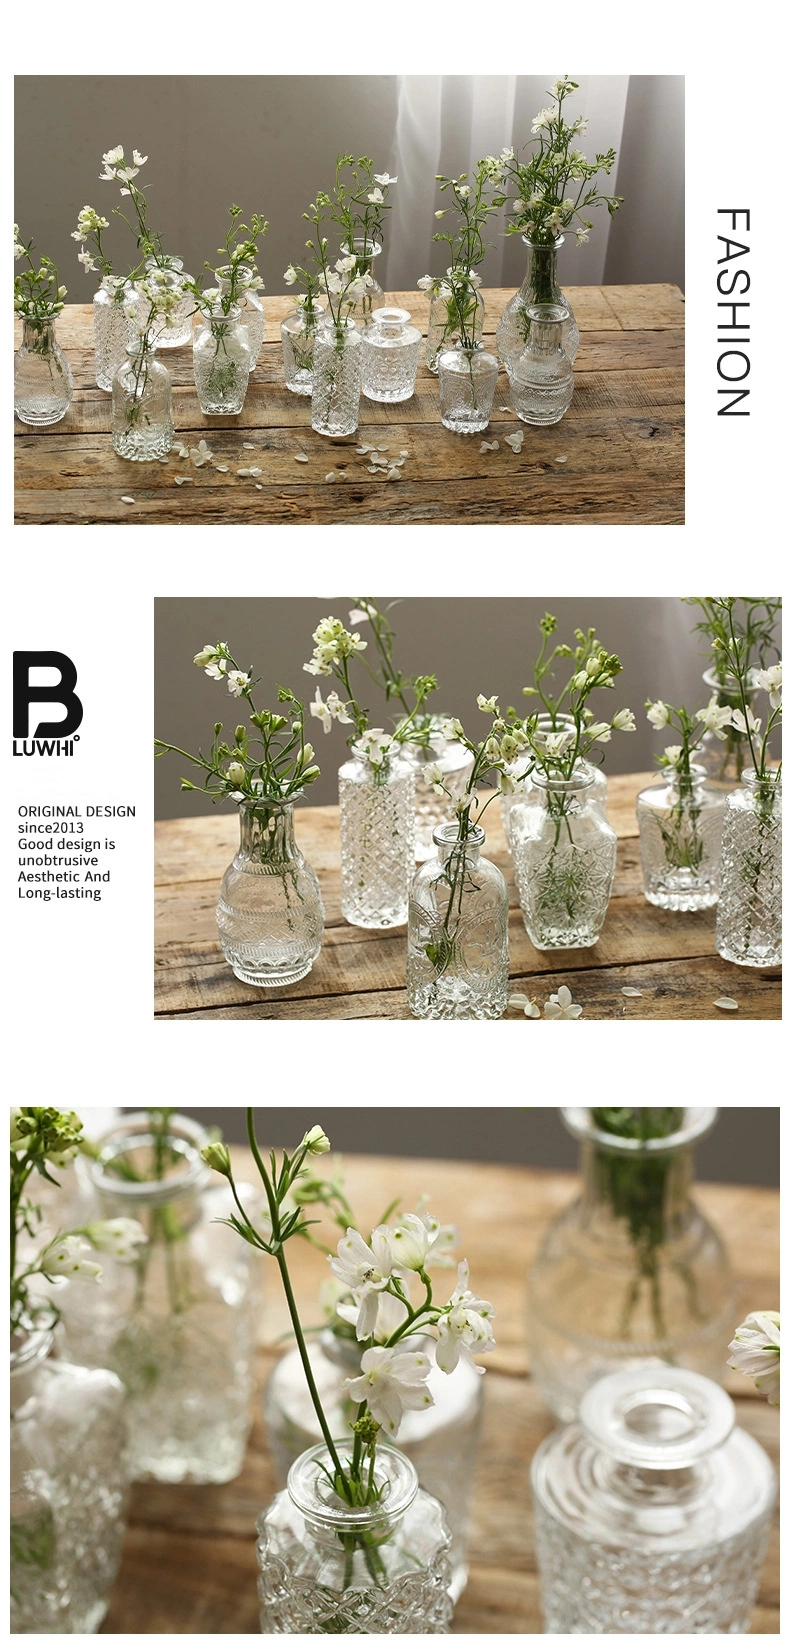 Small Clear Cute Mini Vintage Decorations Home Table Flower Decor Glass Vases for Rustic Wedding